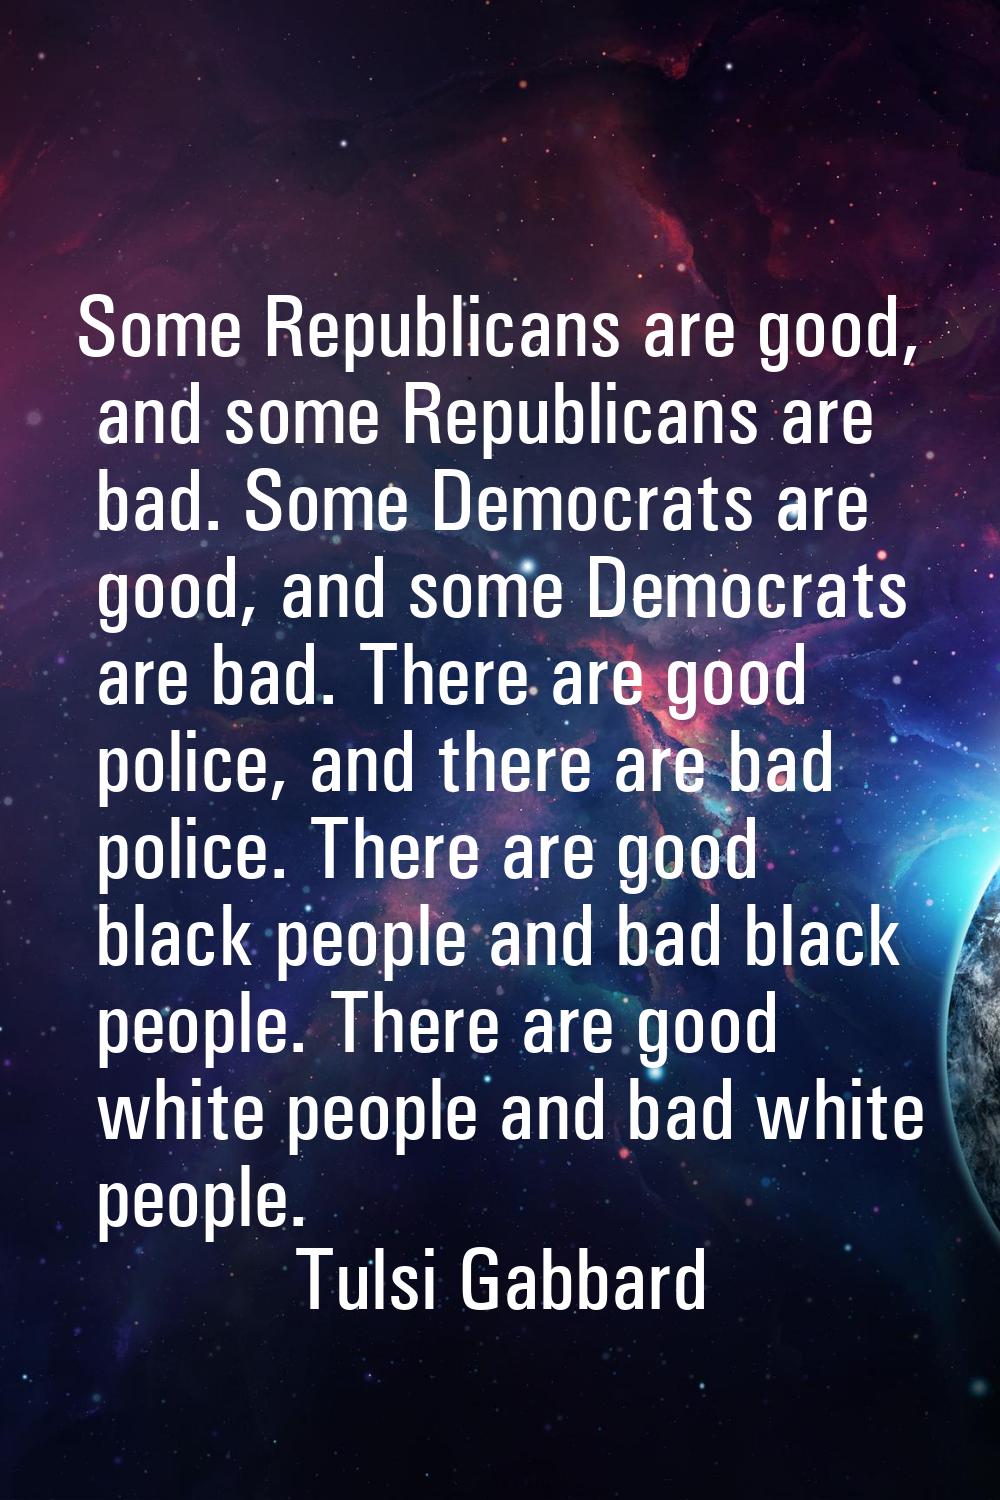 Some Republicans are good, and some Republicans are bad. Some Democrats are good, and some Democrat